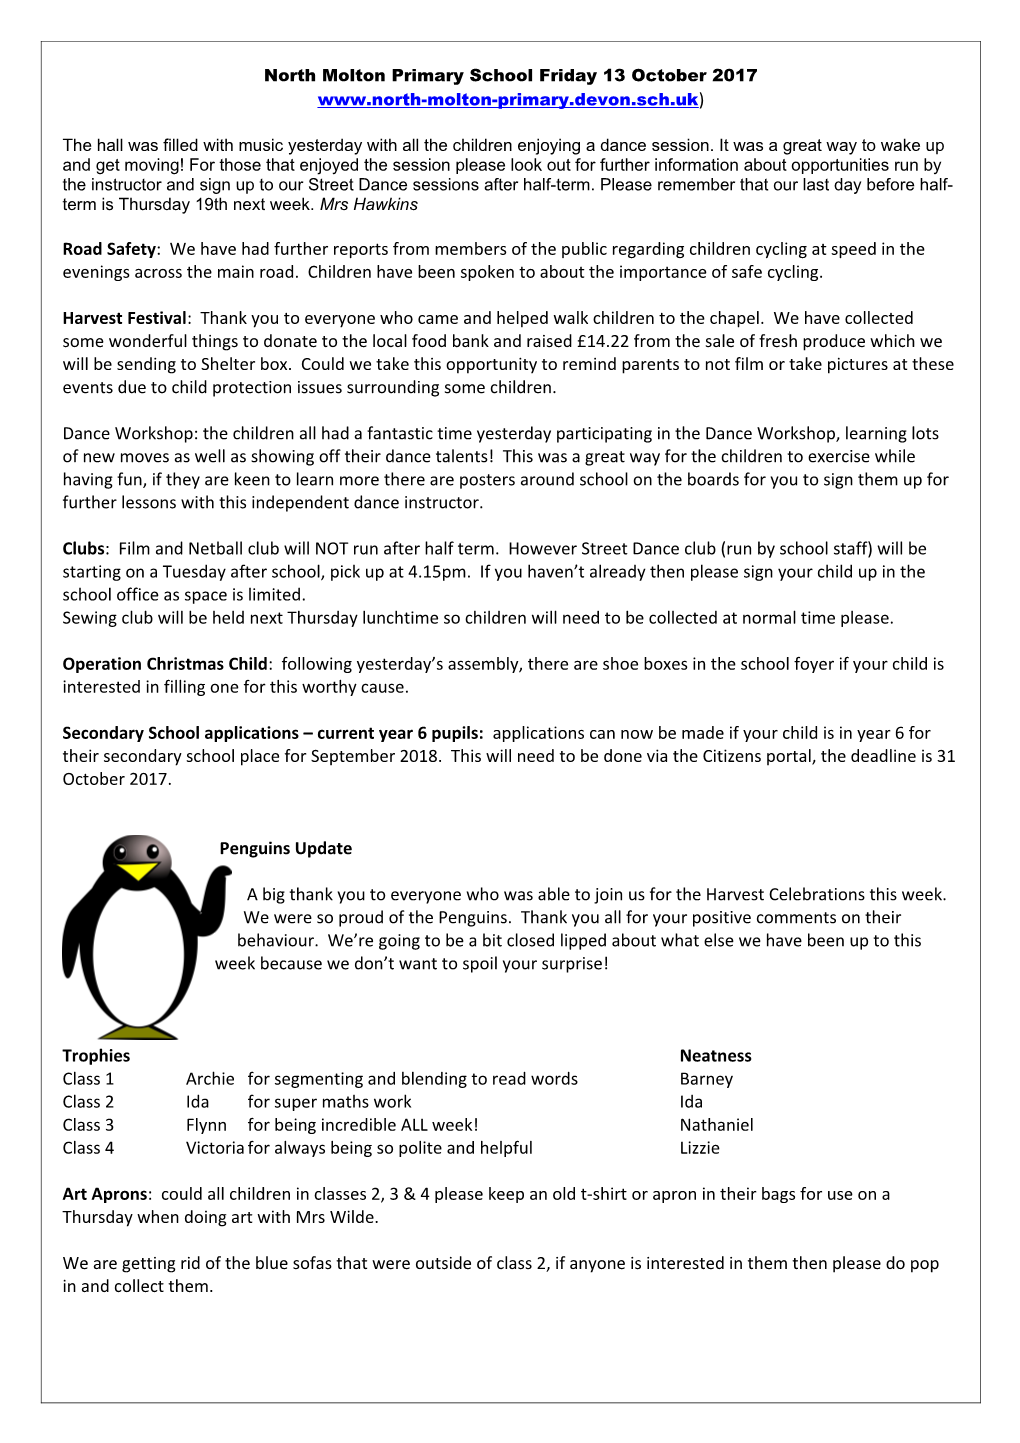 North Molton Primary School Friday Newsletter 27 June 2008 s1